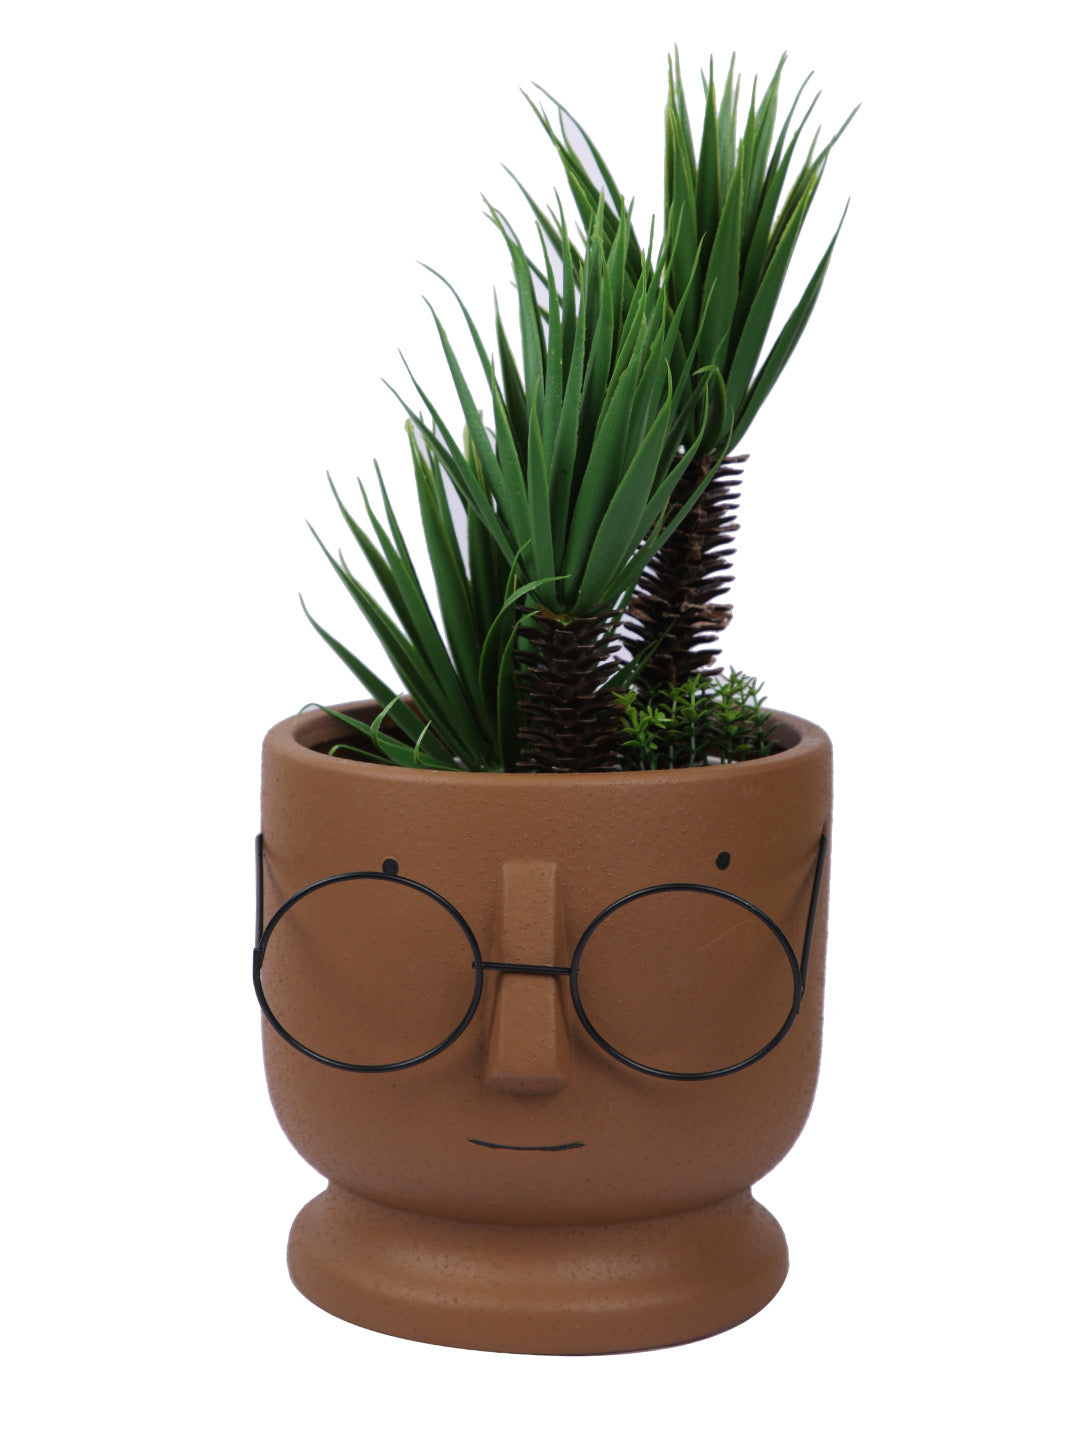 Cute Human Face Ceramic Brown Planter with Specs - Default Title (CHC22513BR)